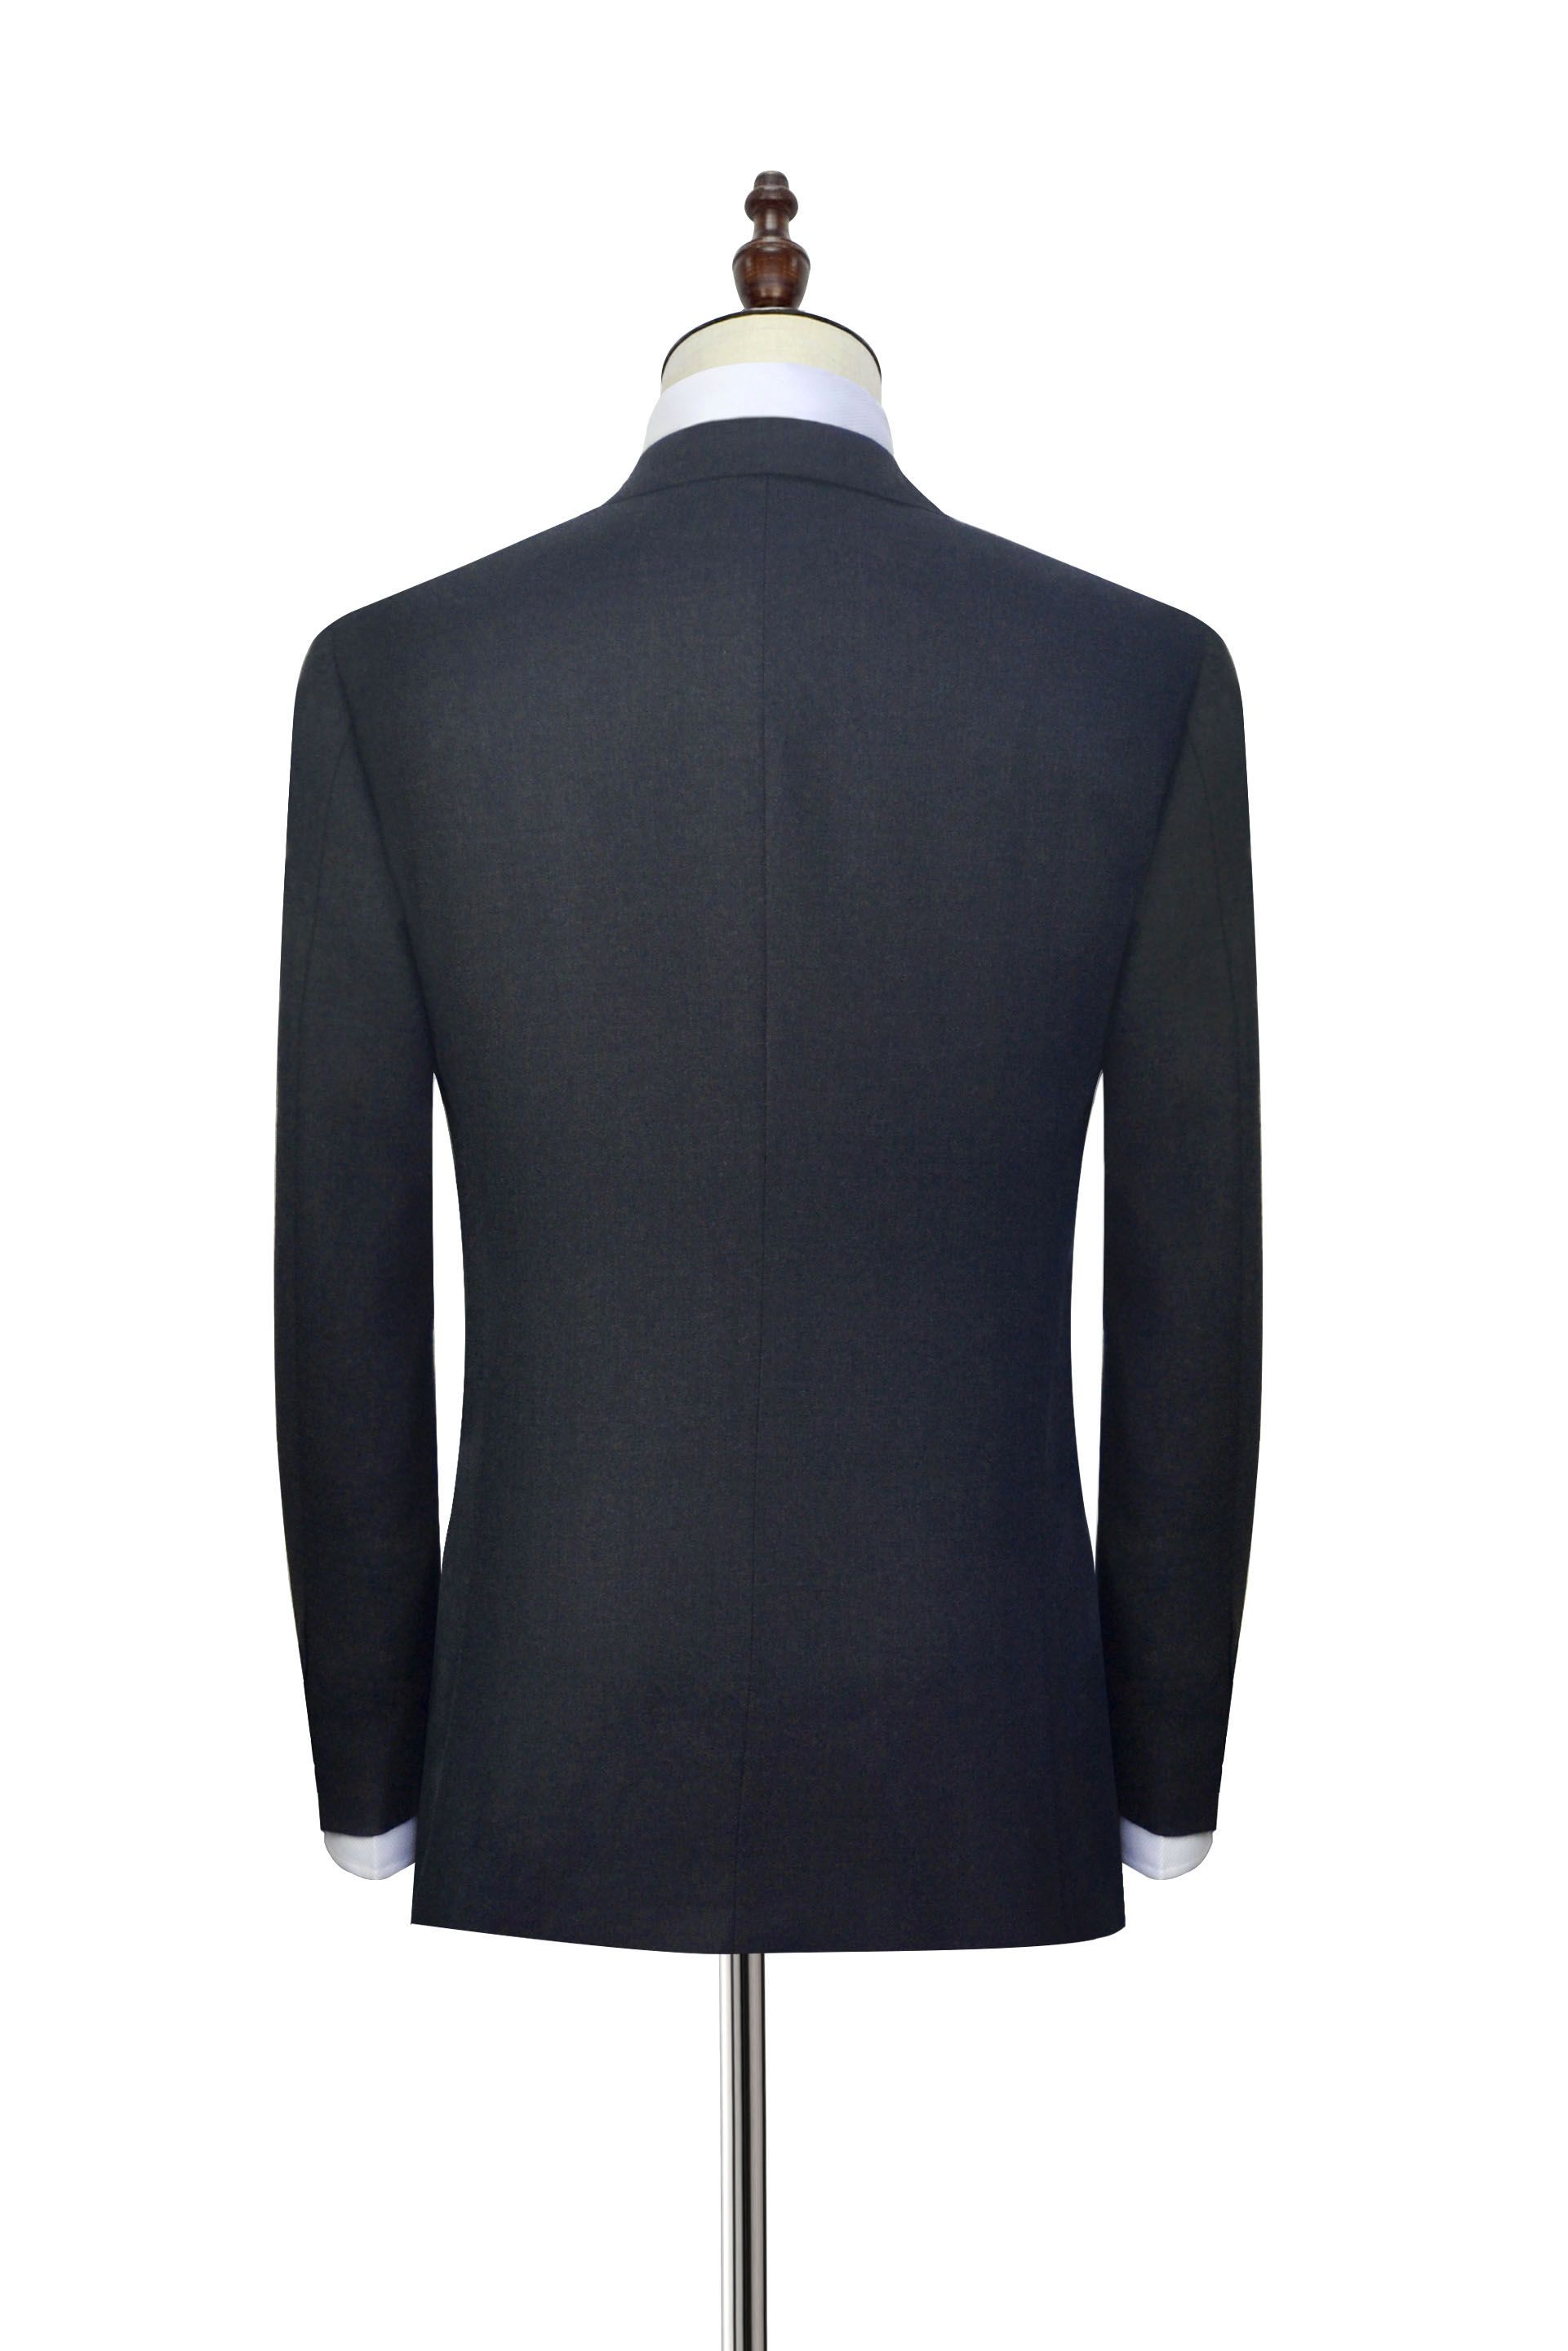 Black tweed Notched lapel custom suits for formal 